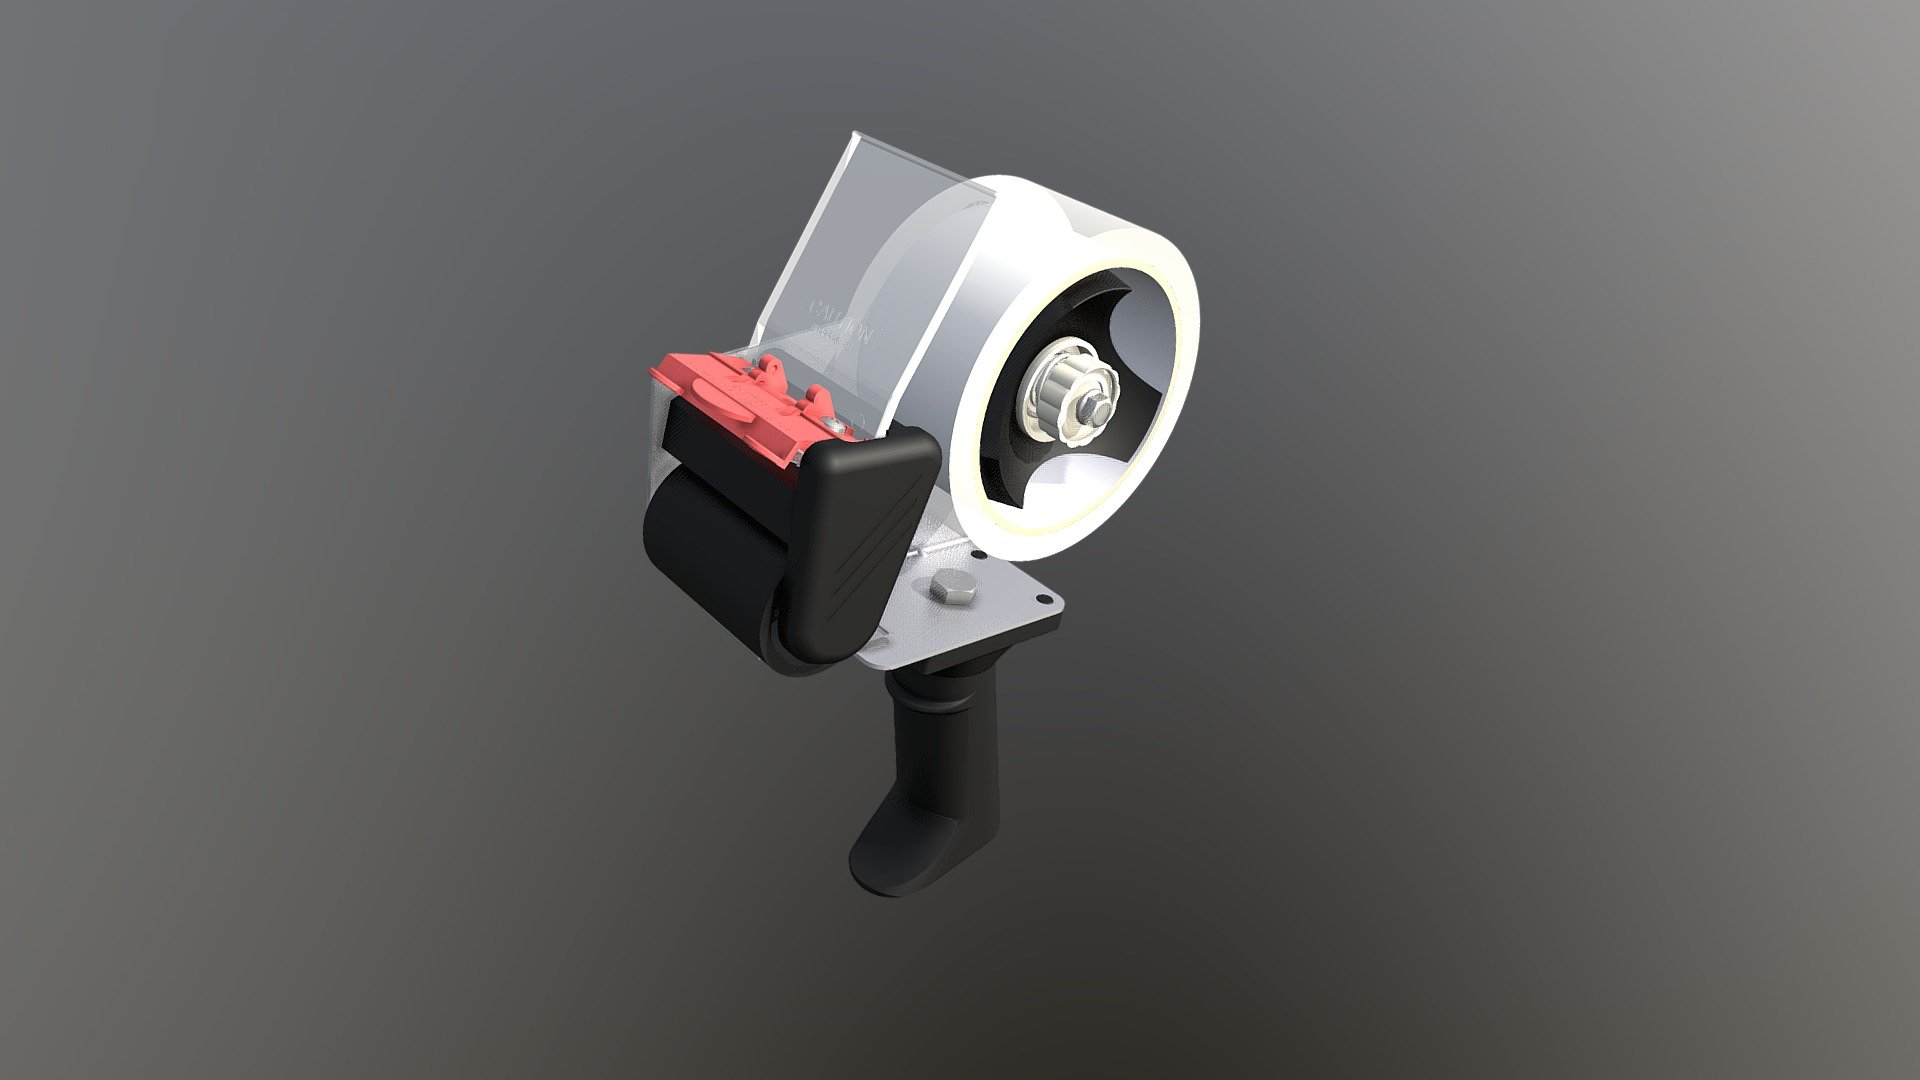 Highly detailed assembly of a hand held tape dispenser 3d model